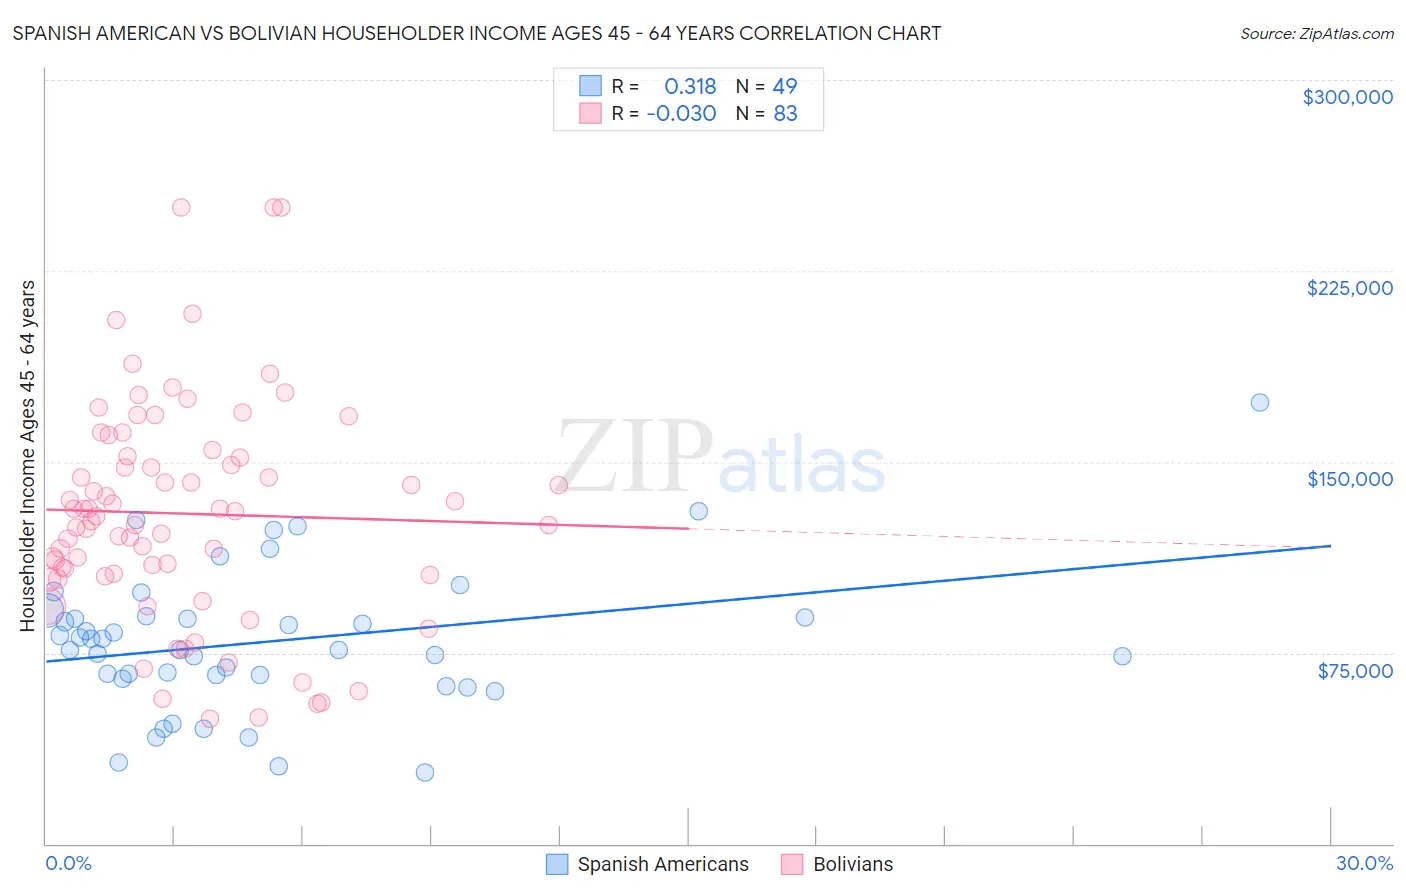 Spanish American vs Bolivian Householder Income Ages 45 - 64 years